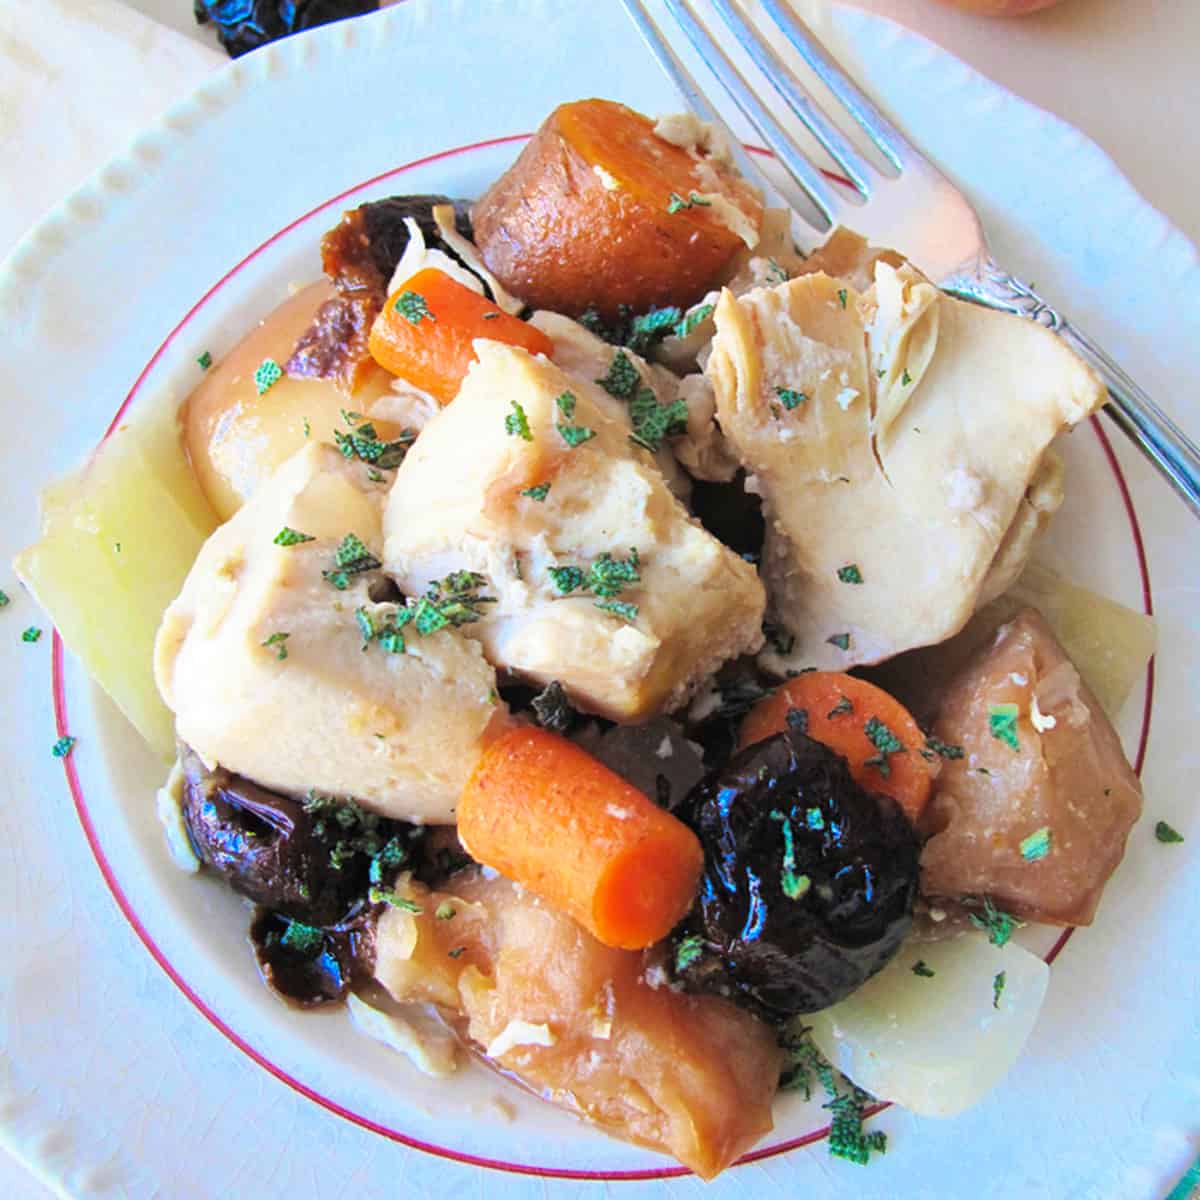 13. AIP Slow Cooker Chicken Stew With Plums, Carrots and Apples